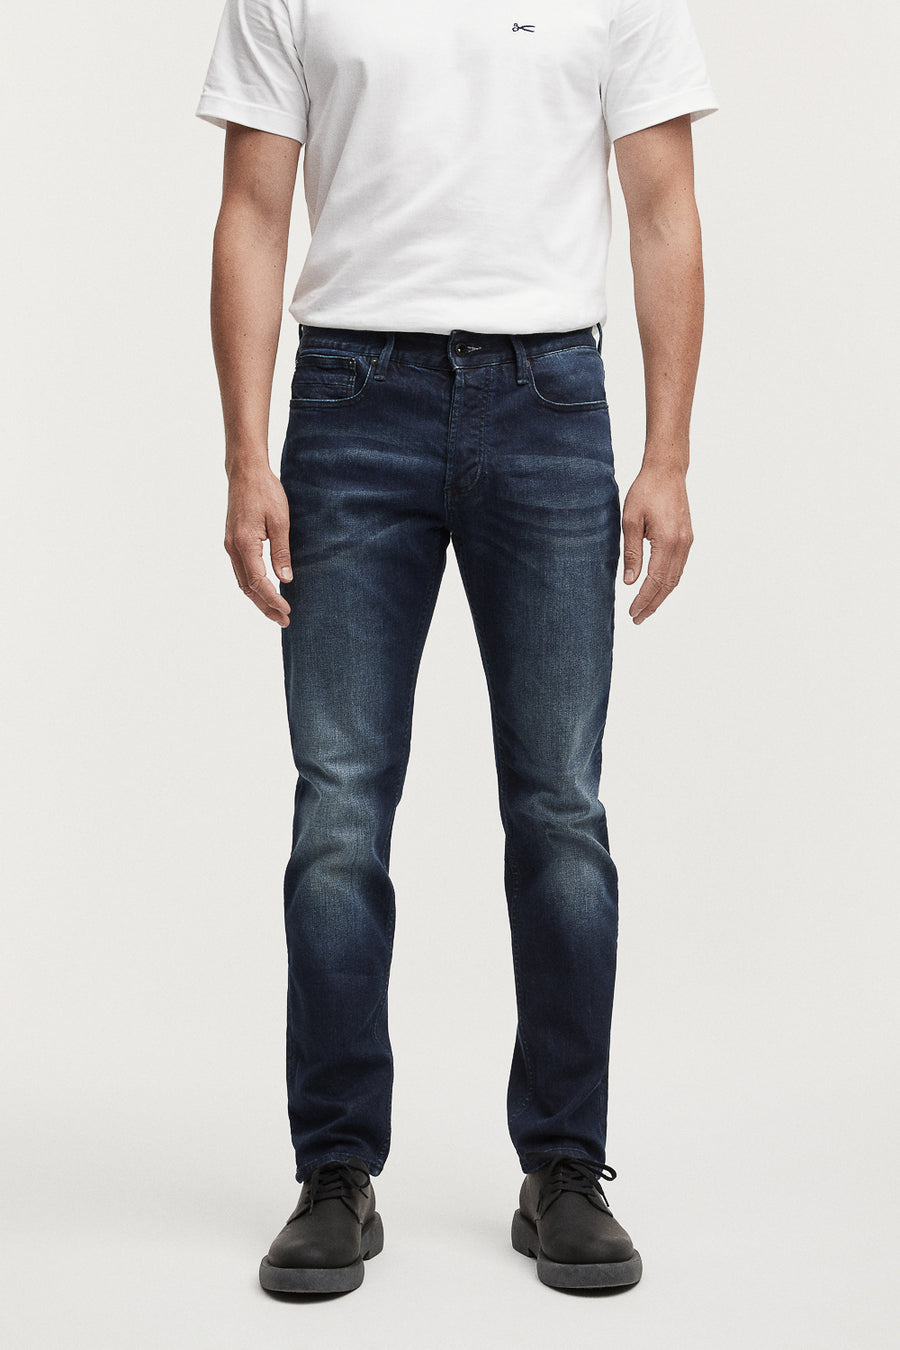 Buy the Denham Razor KB Jeans in Blue at Intro. Spend £50 for free UK delivery. Official stockists. We ship worldwide.